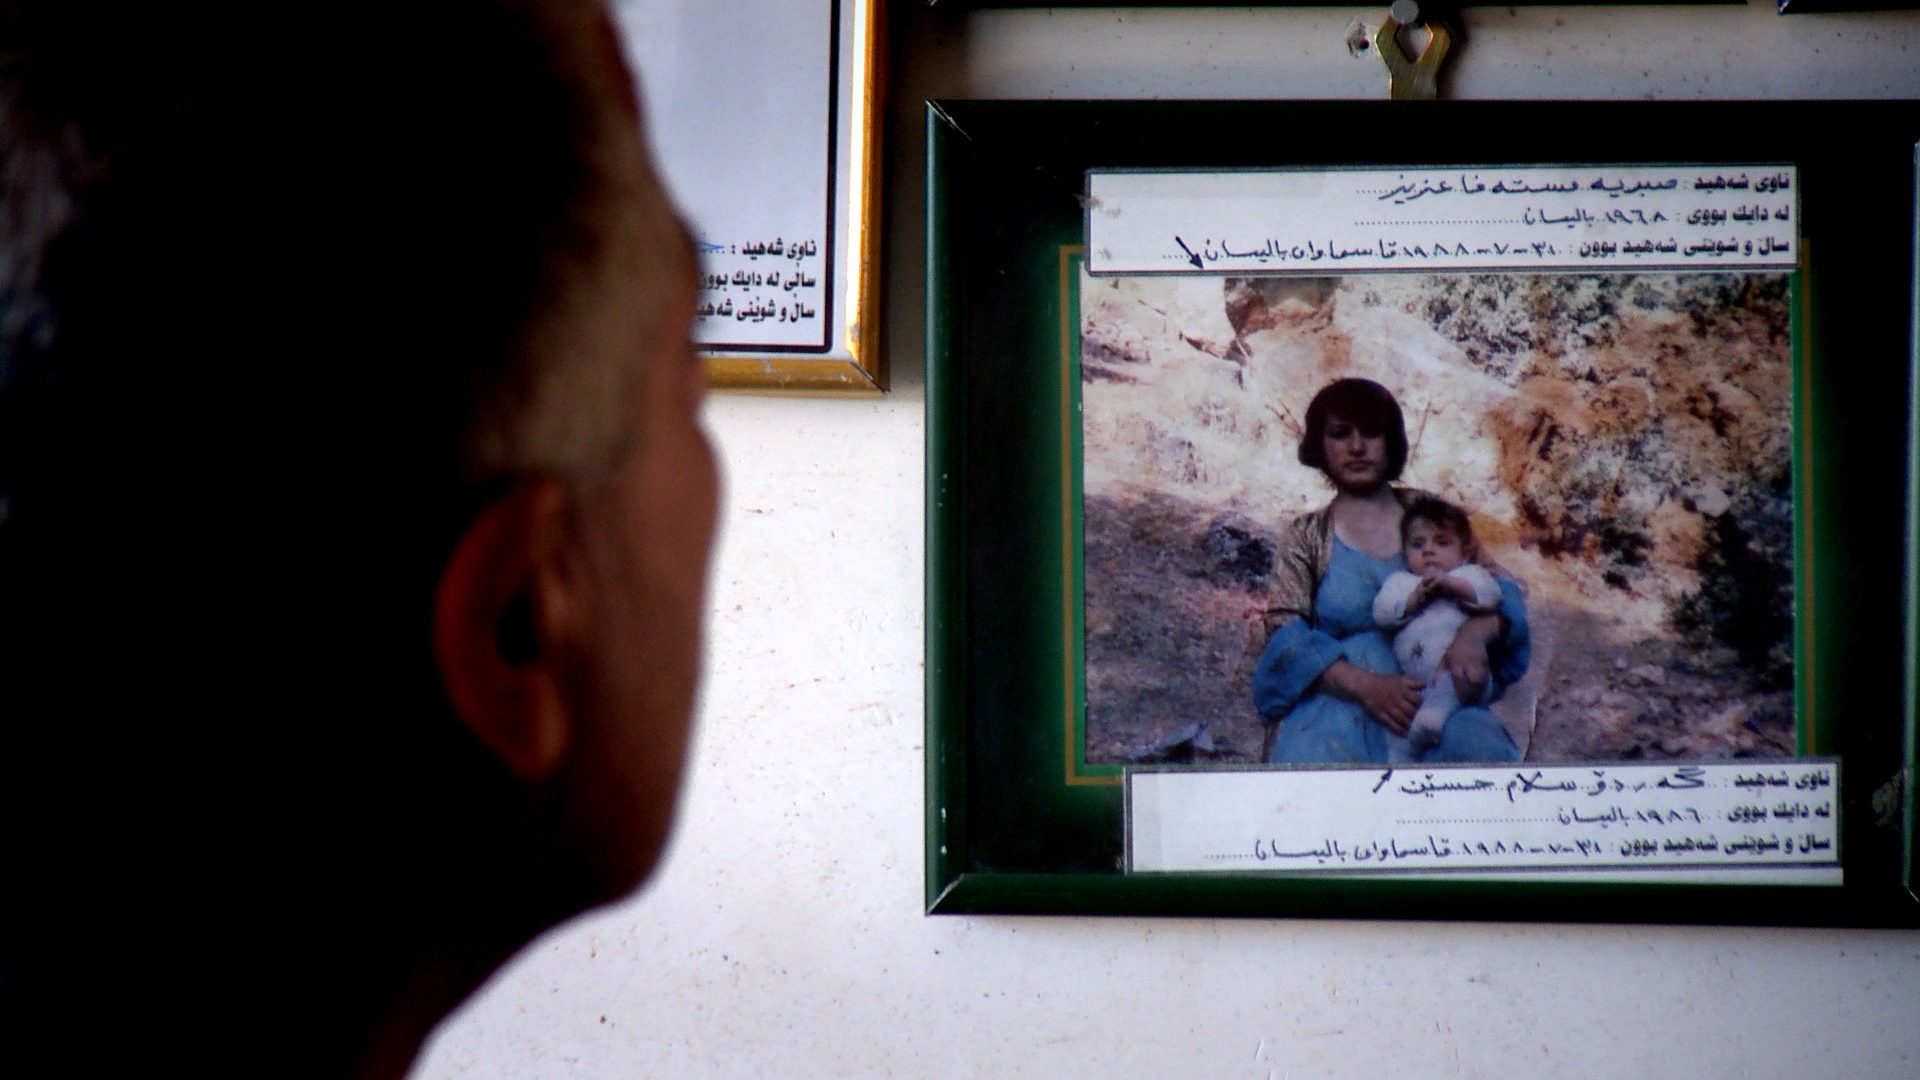 SALAM HUSSEIN AZIZâ€™s baby son died in his arms after a chemical attack on the Balisan valley in 1988. He found the bodies of his wife and other children in a shelter close to Sheikh Wasan village.